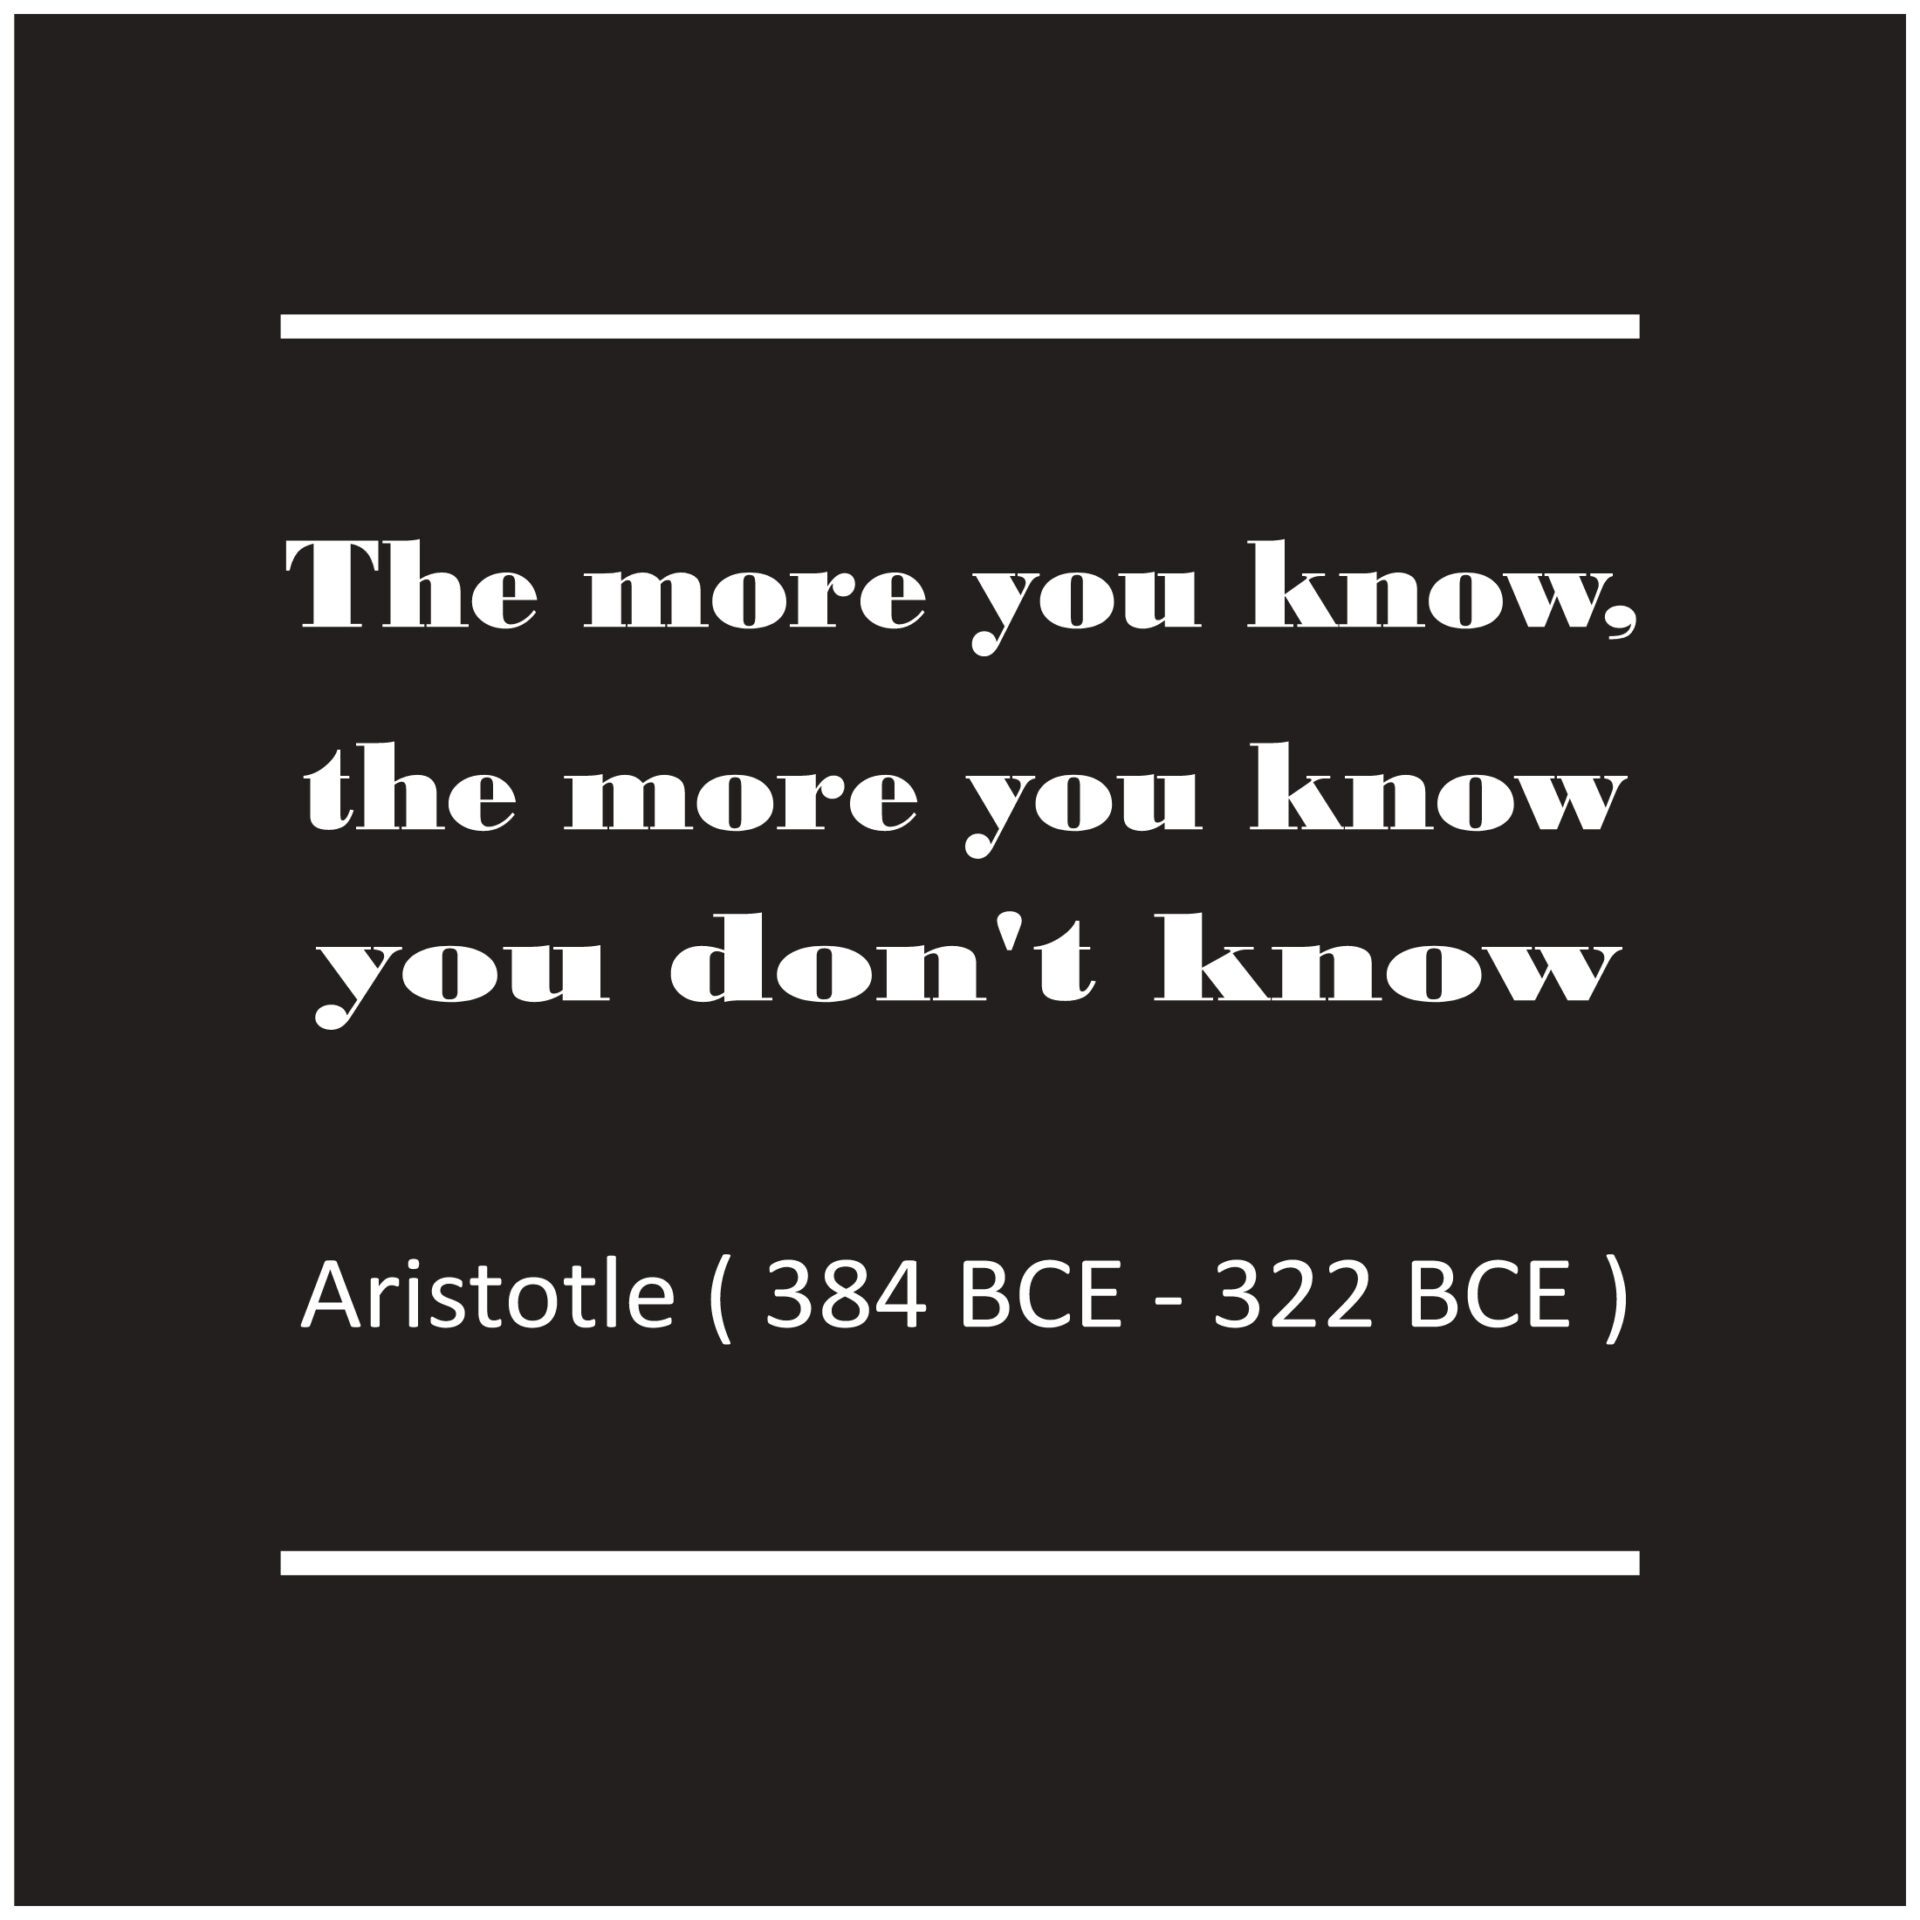 Quote from Aristotle 